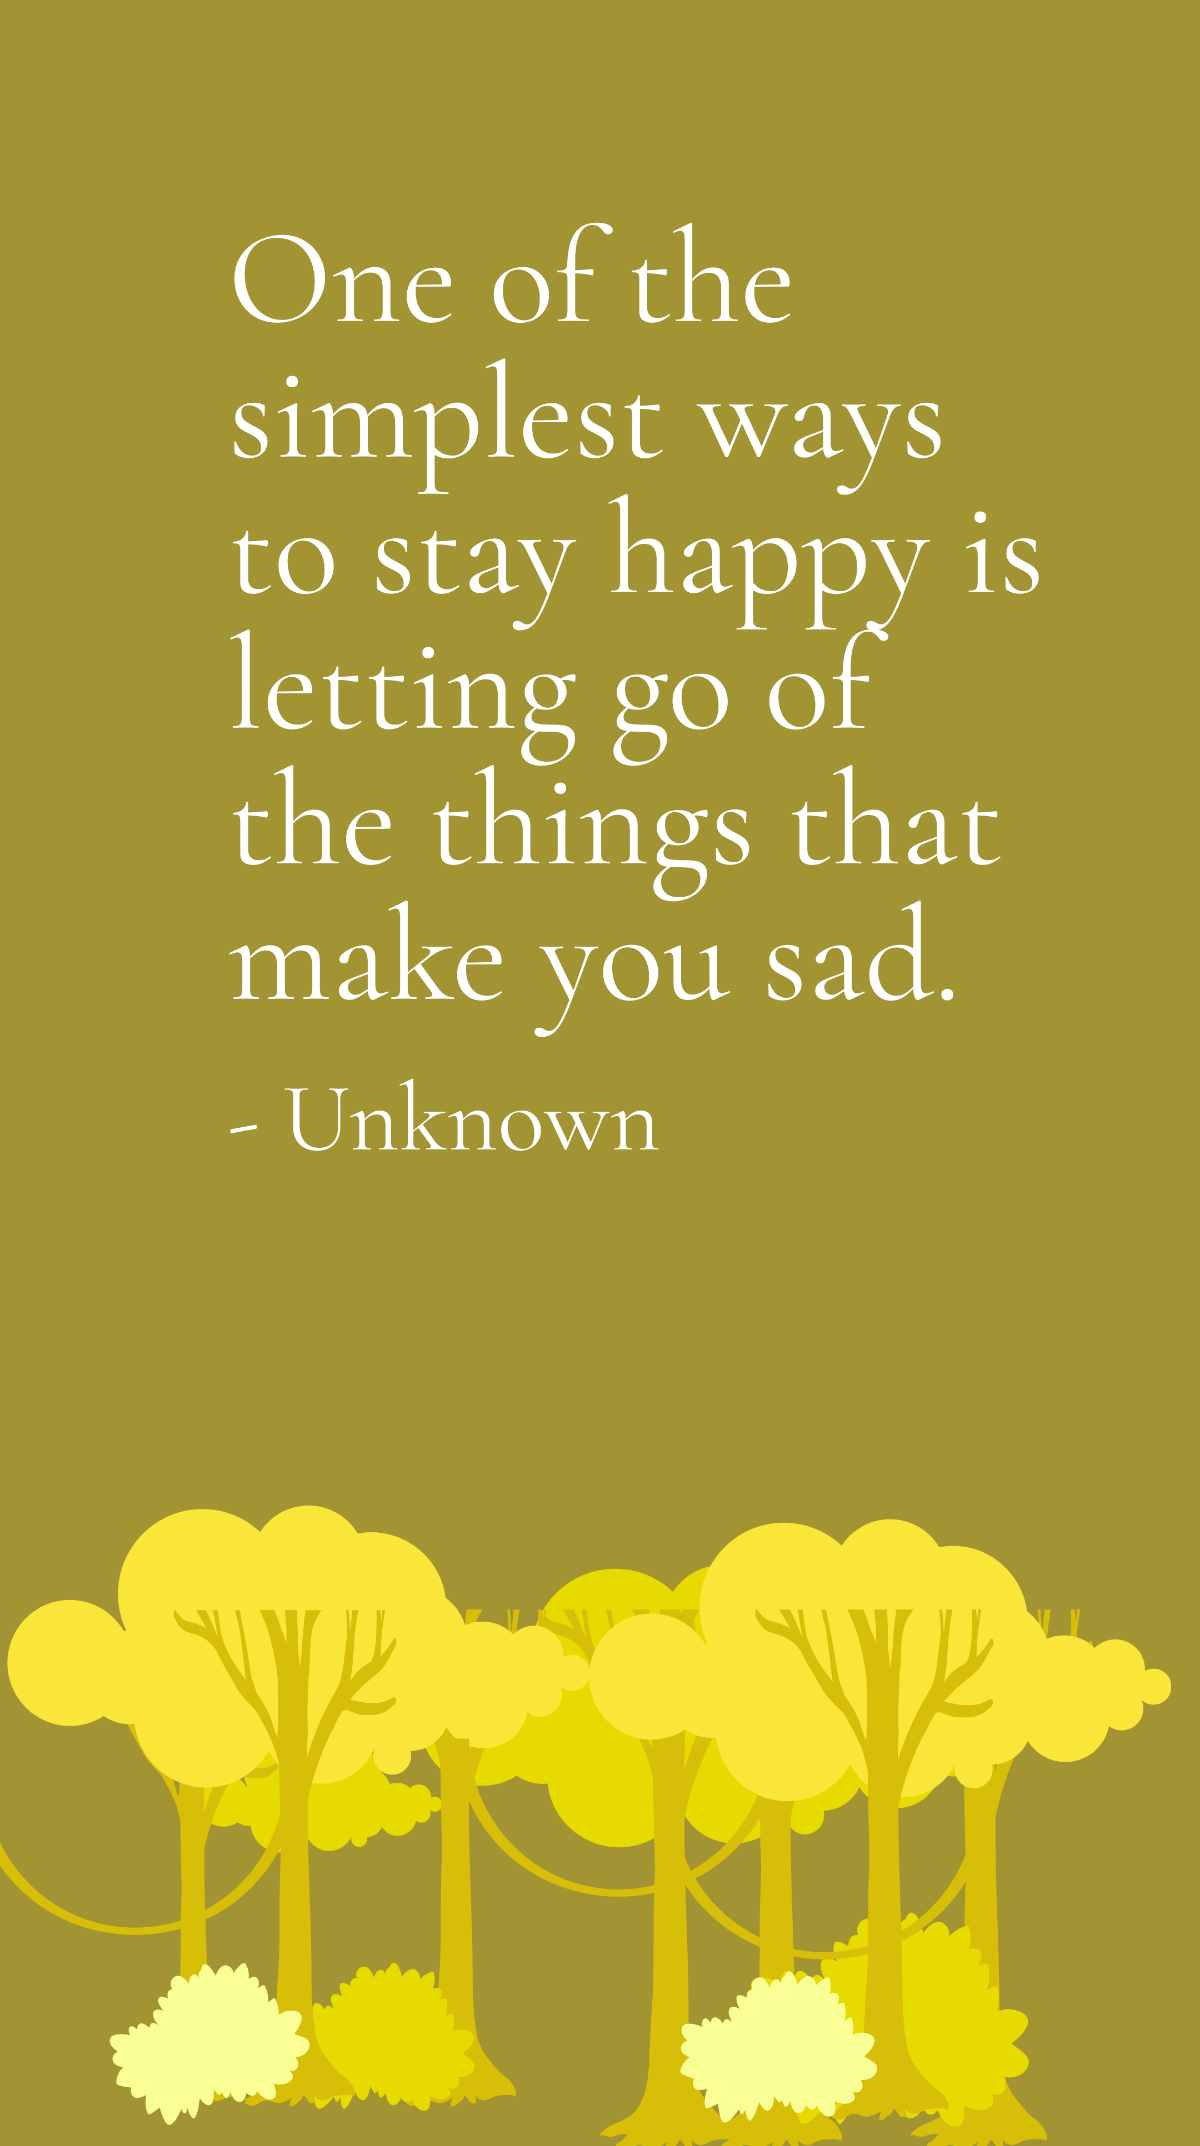 Free Unknown - One of the simplest ways to stay happy is letting go of the things that make you sad. Template